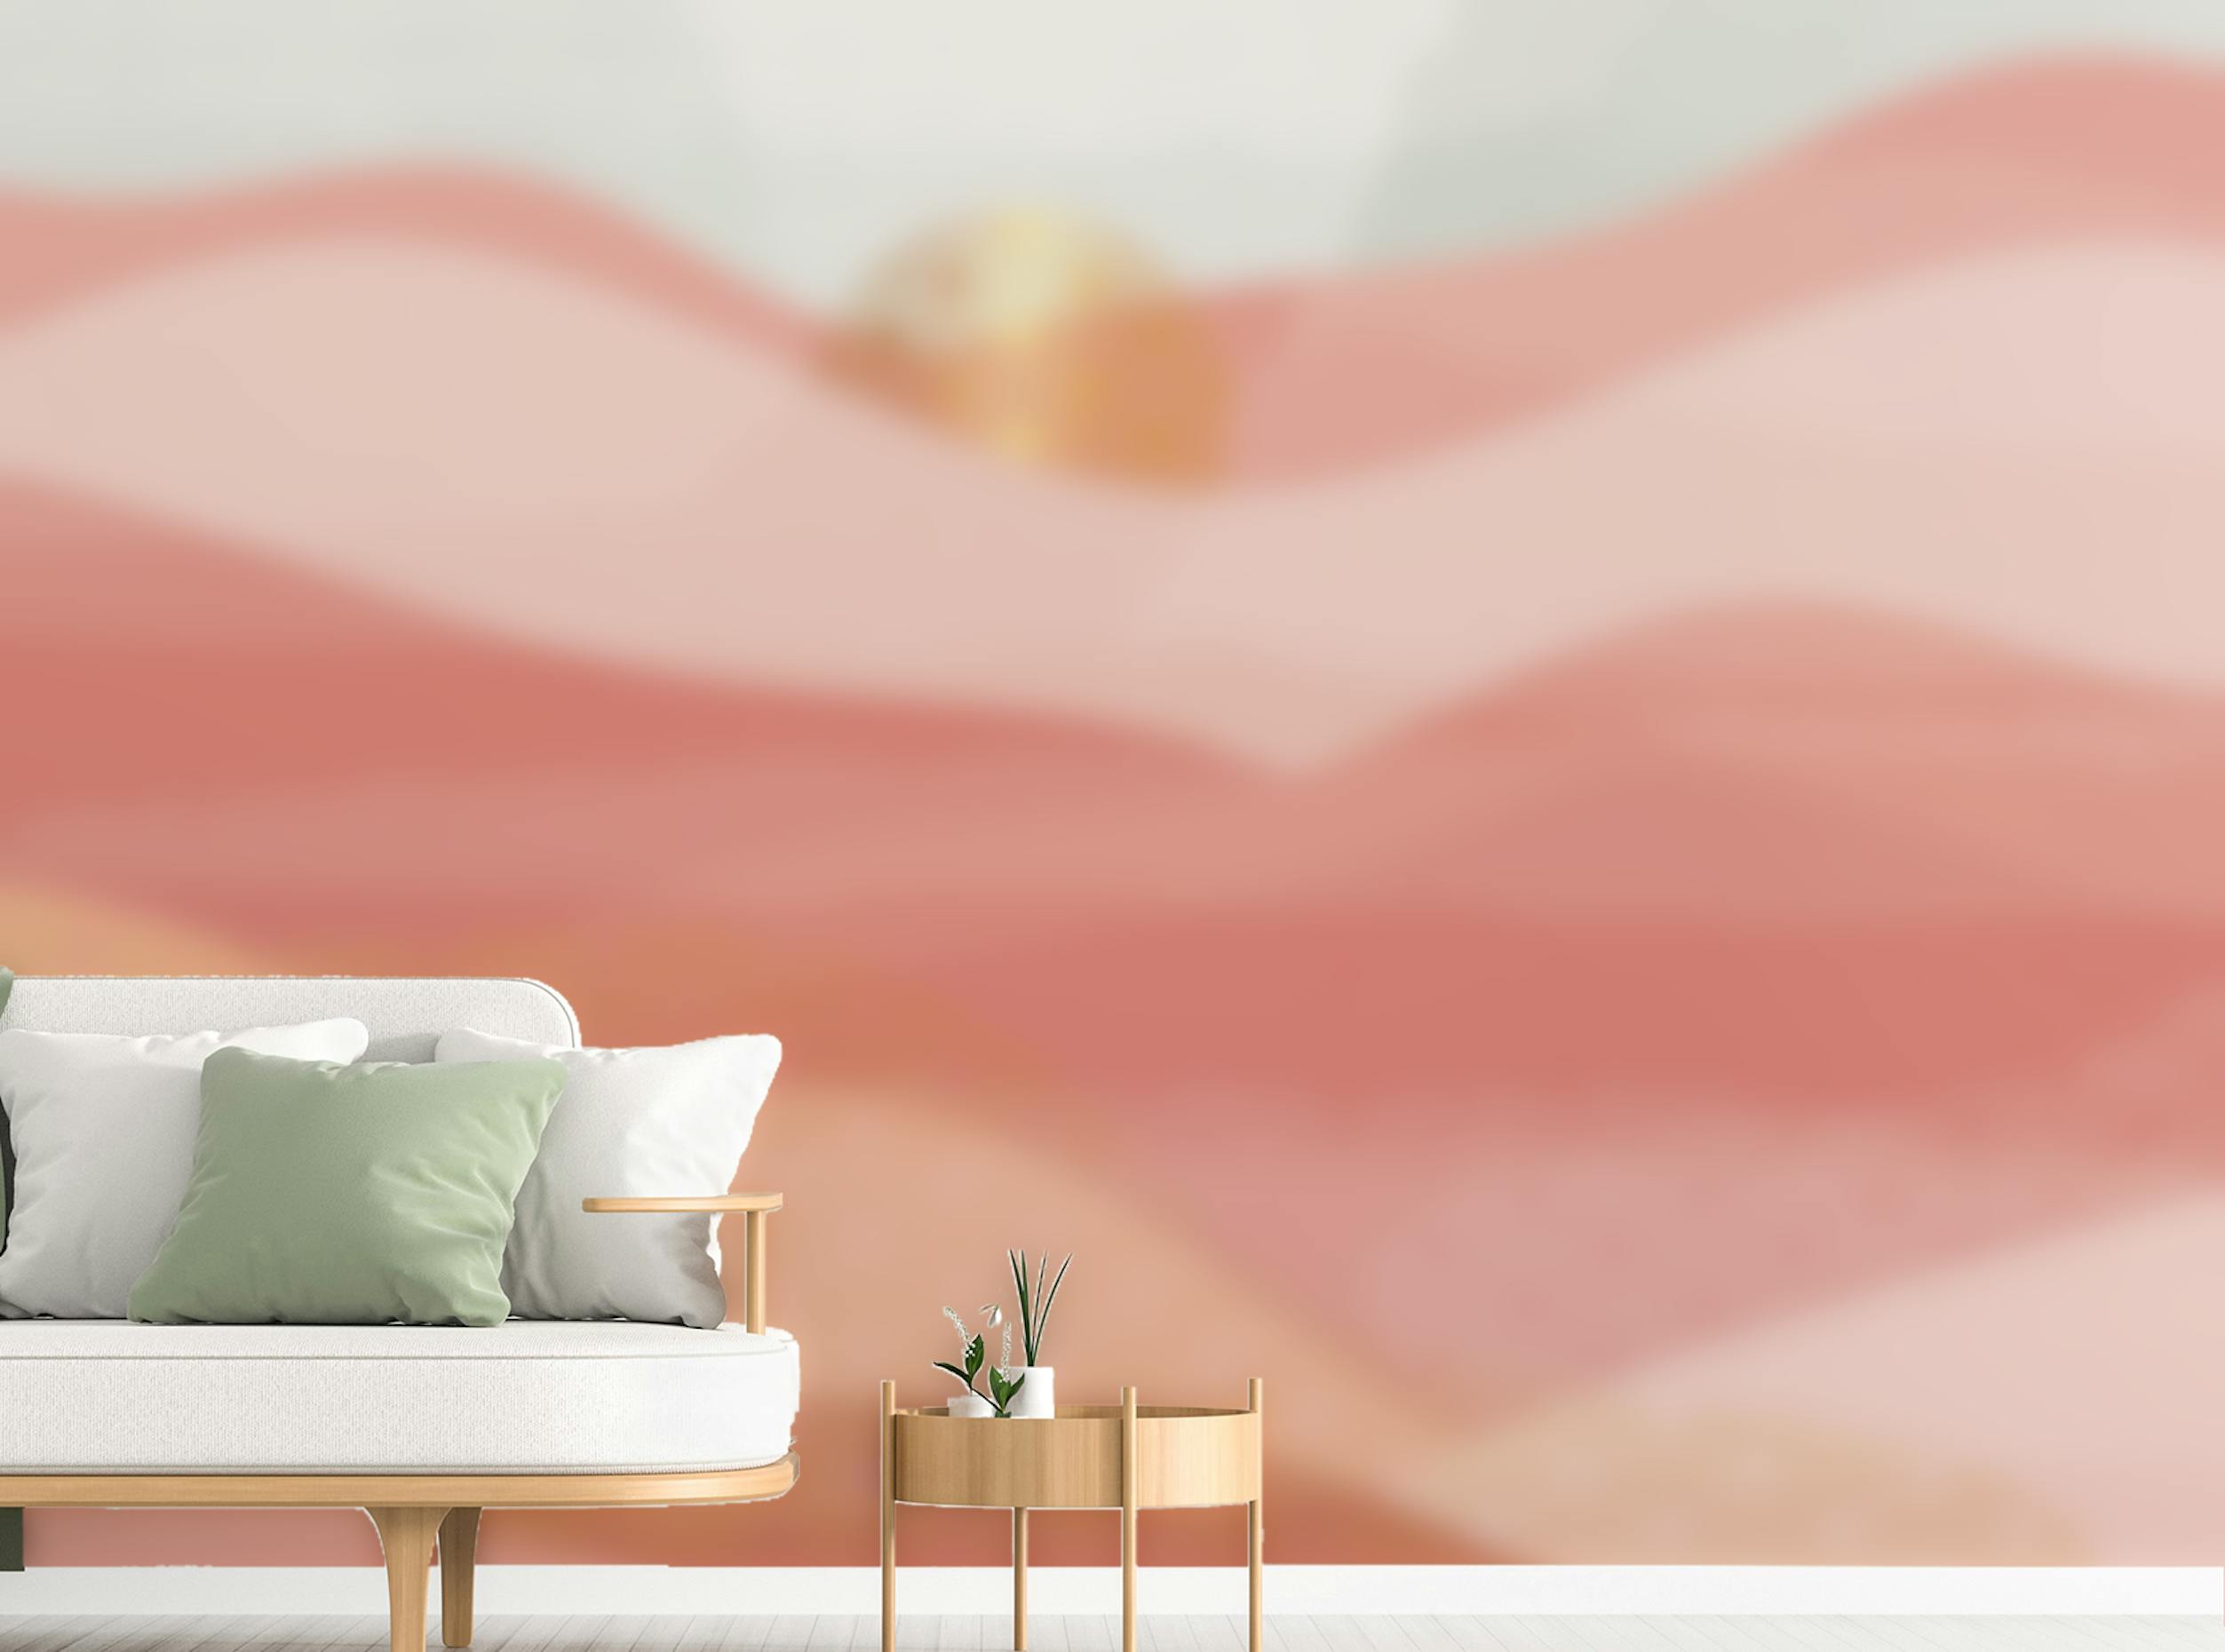 Peel and Stick Pink Color Wavy Mountain Wallpaper Murals